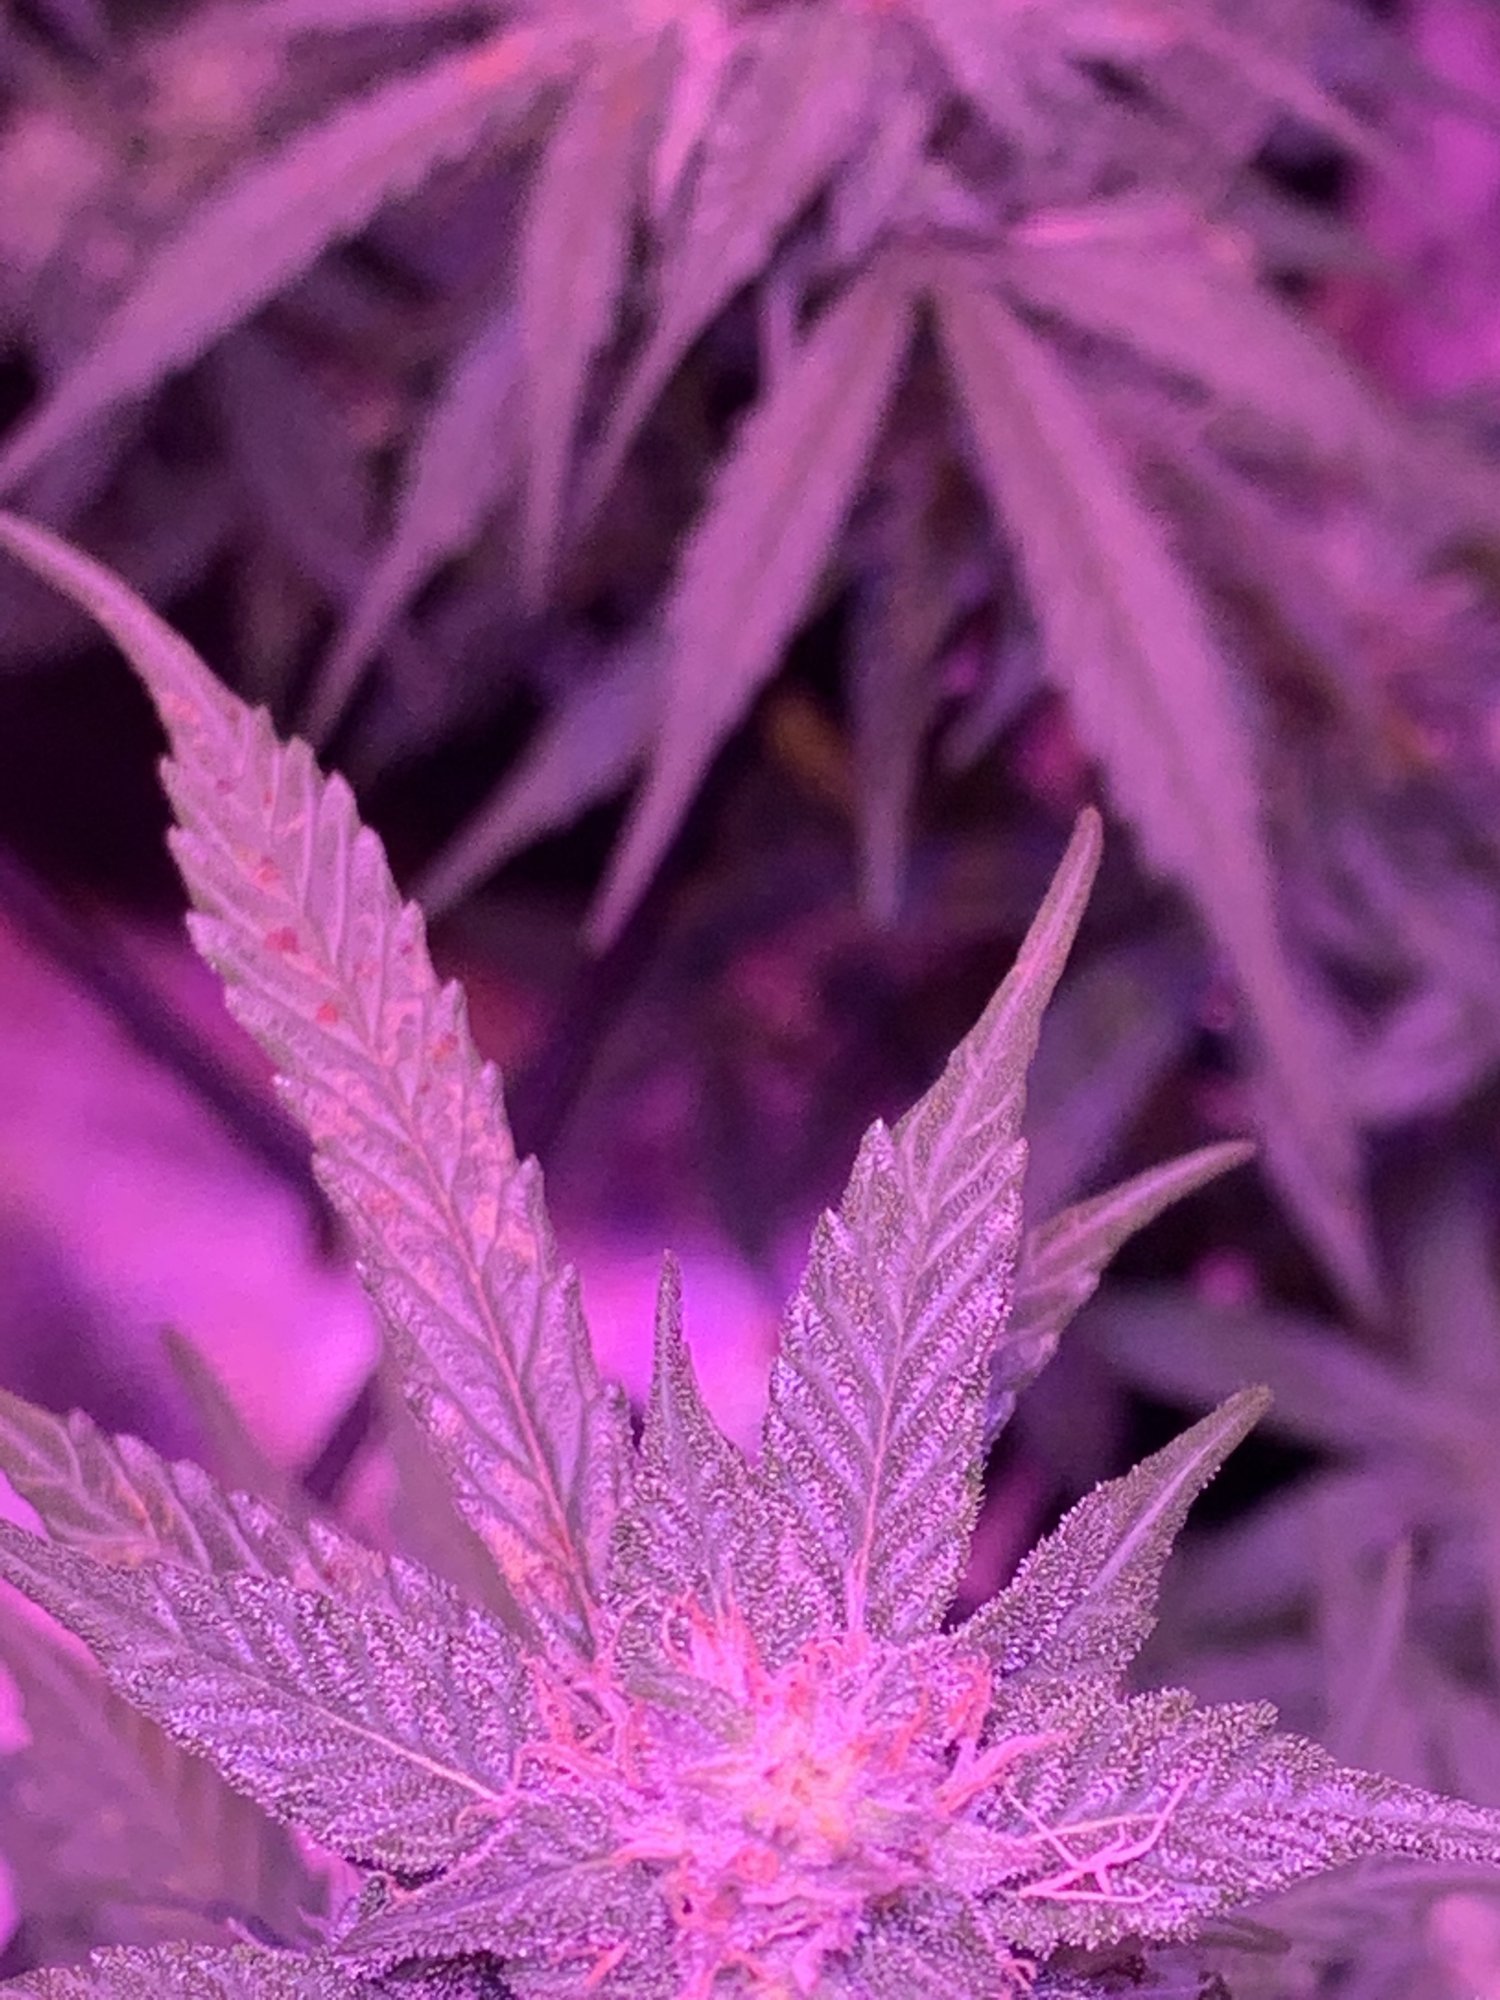 Leaves turned brown and spotted over night 2